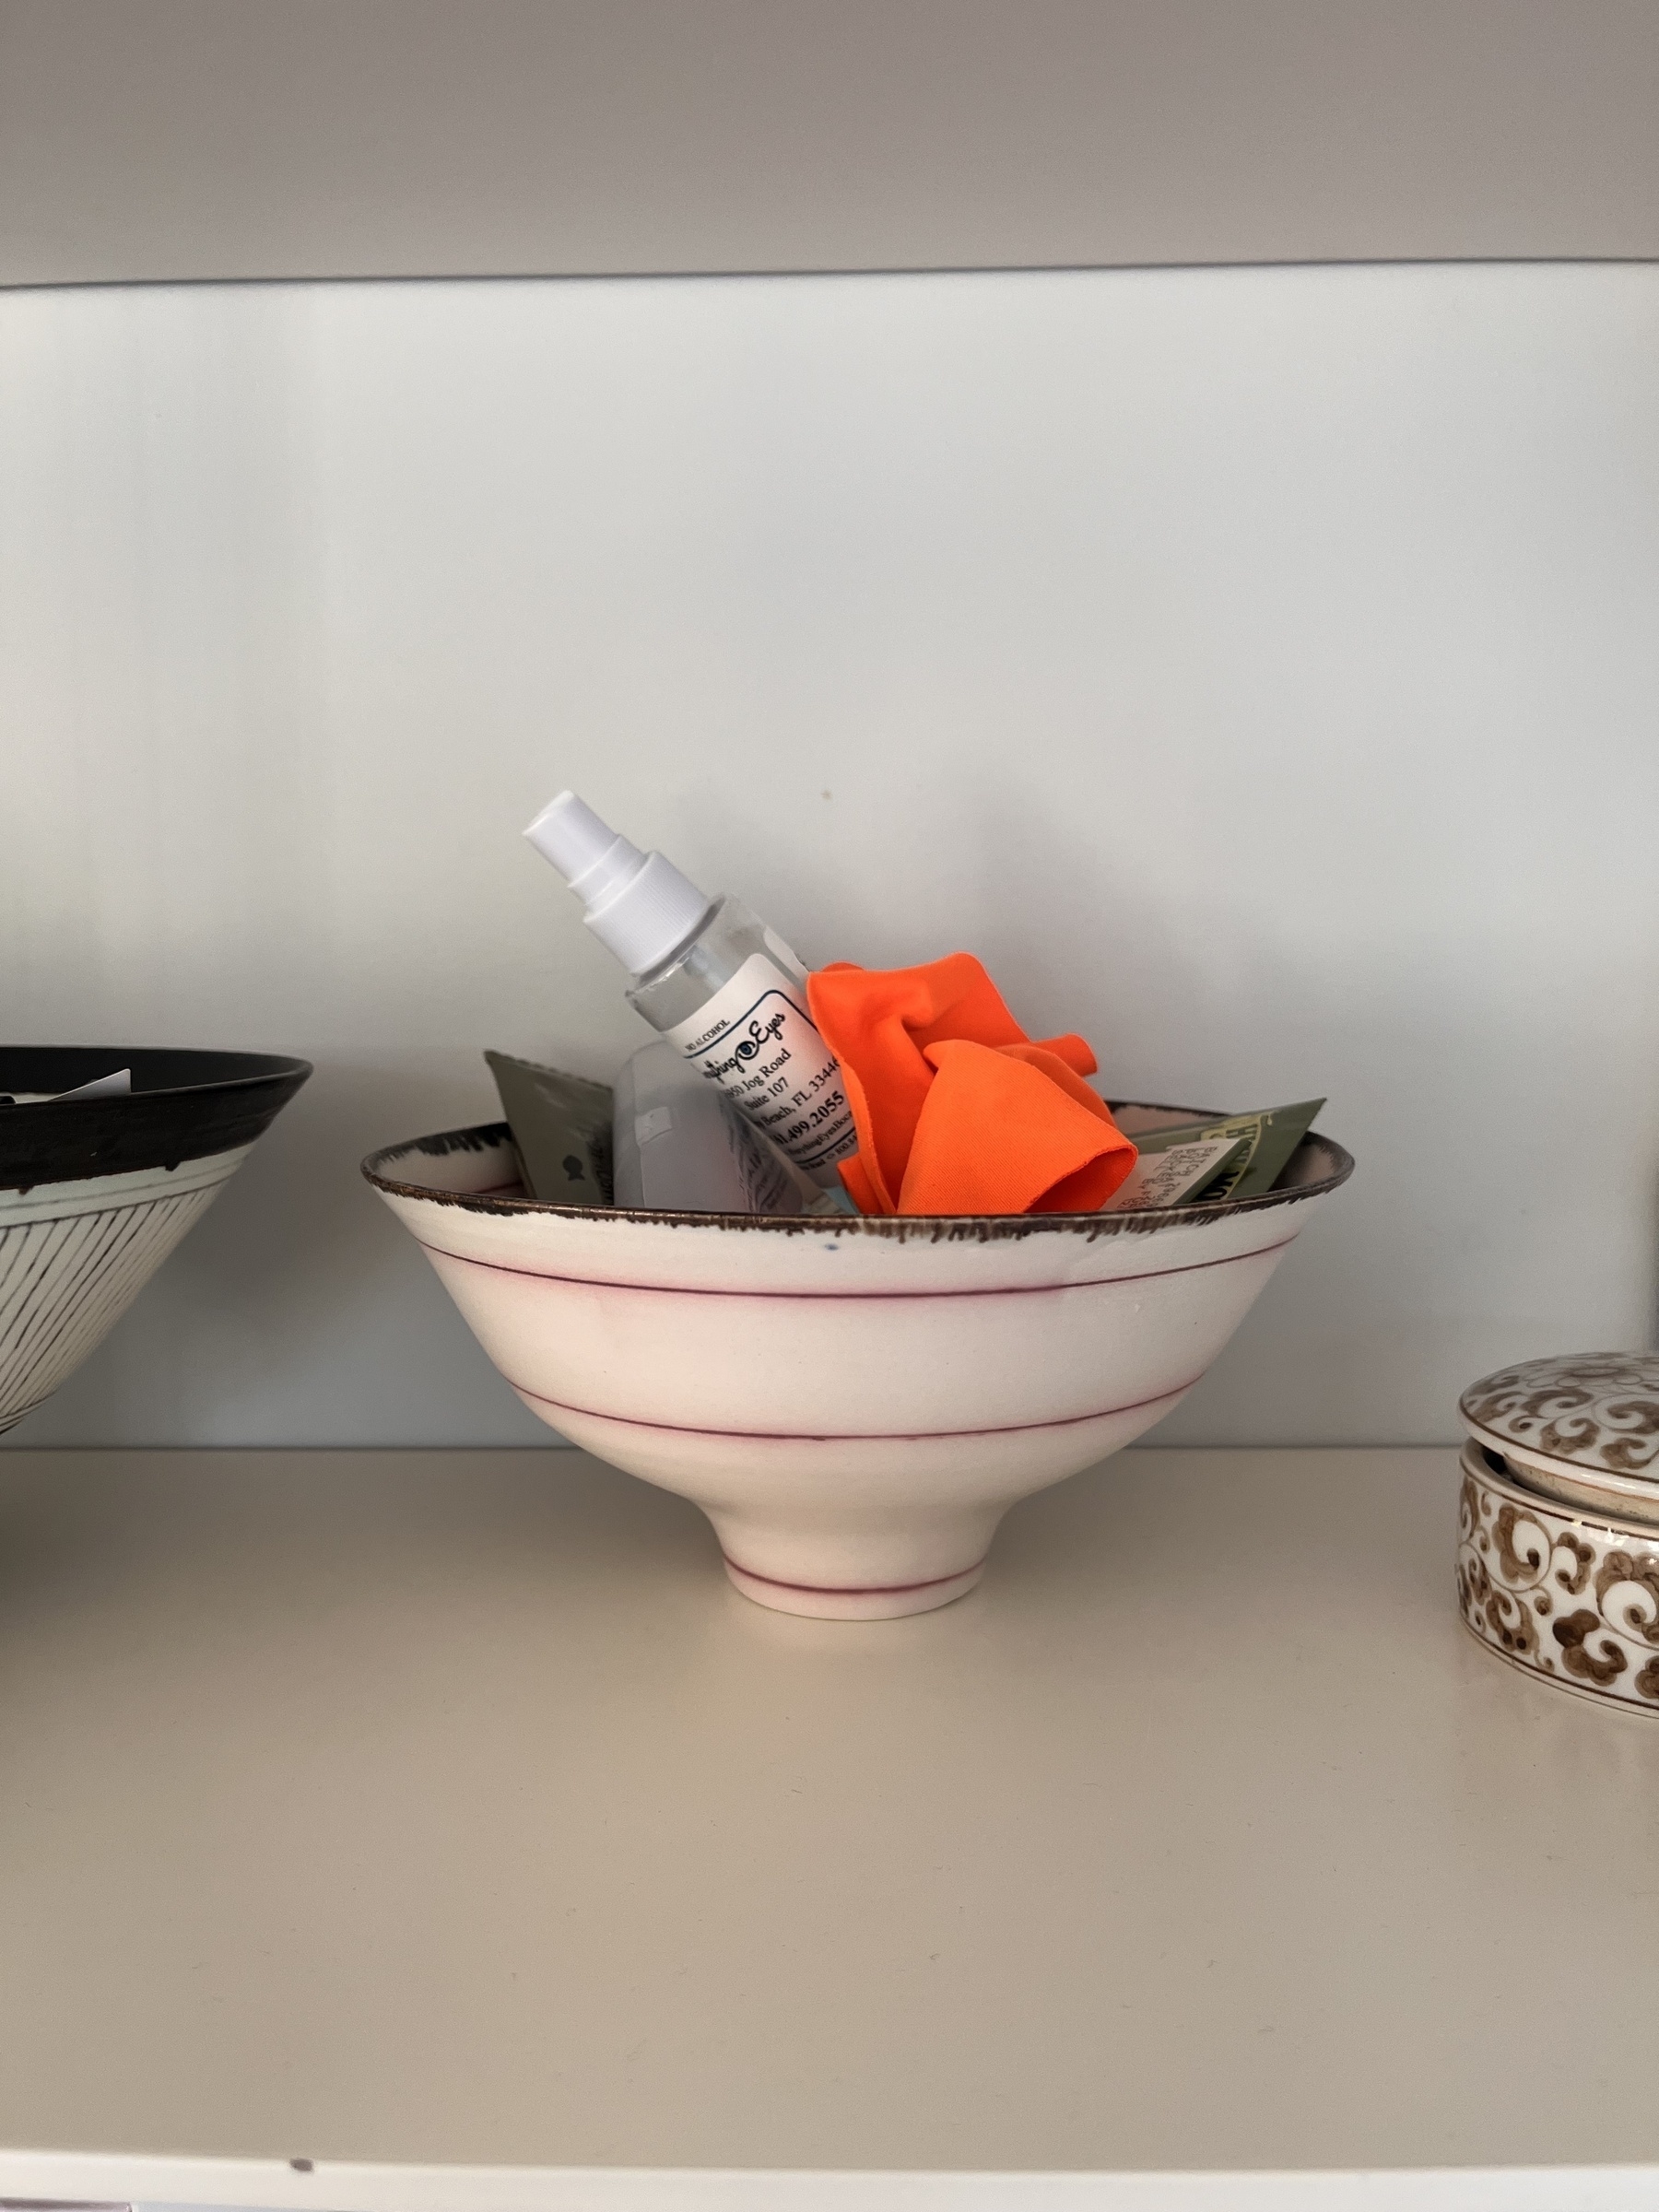 An orange cloth, along with other items, in a china bowl on a shelf